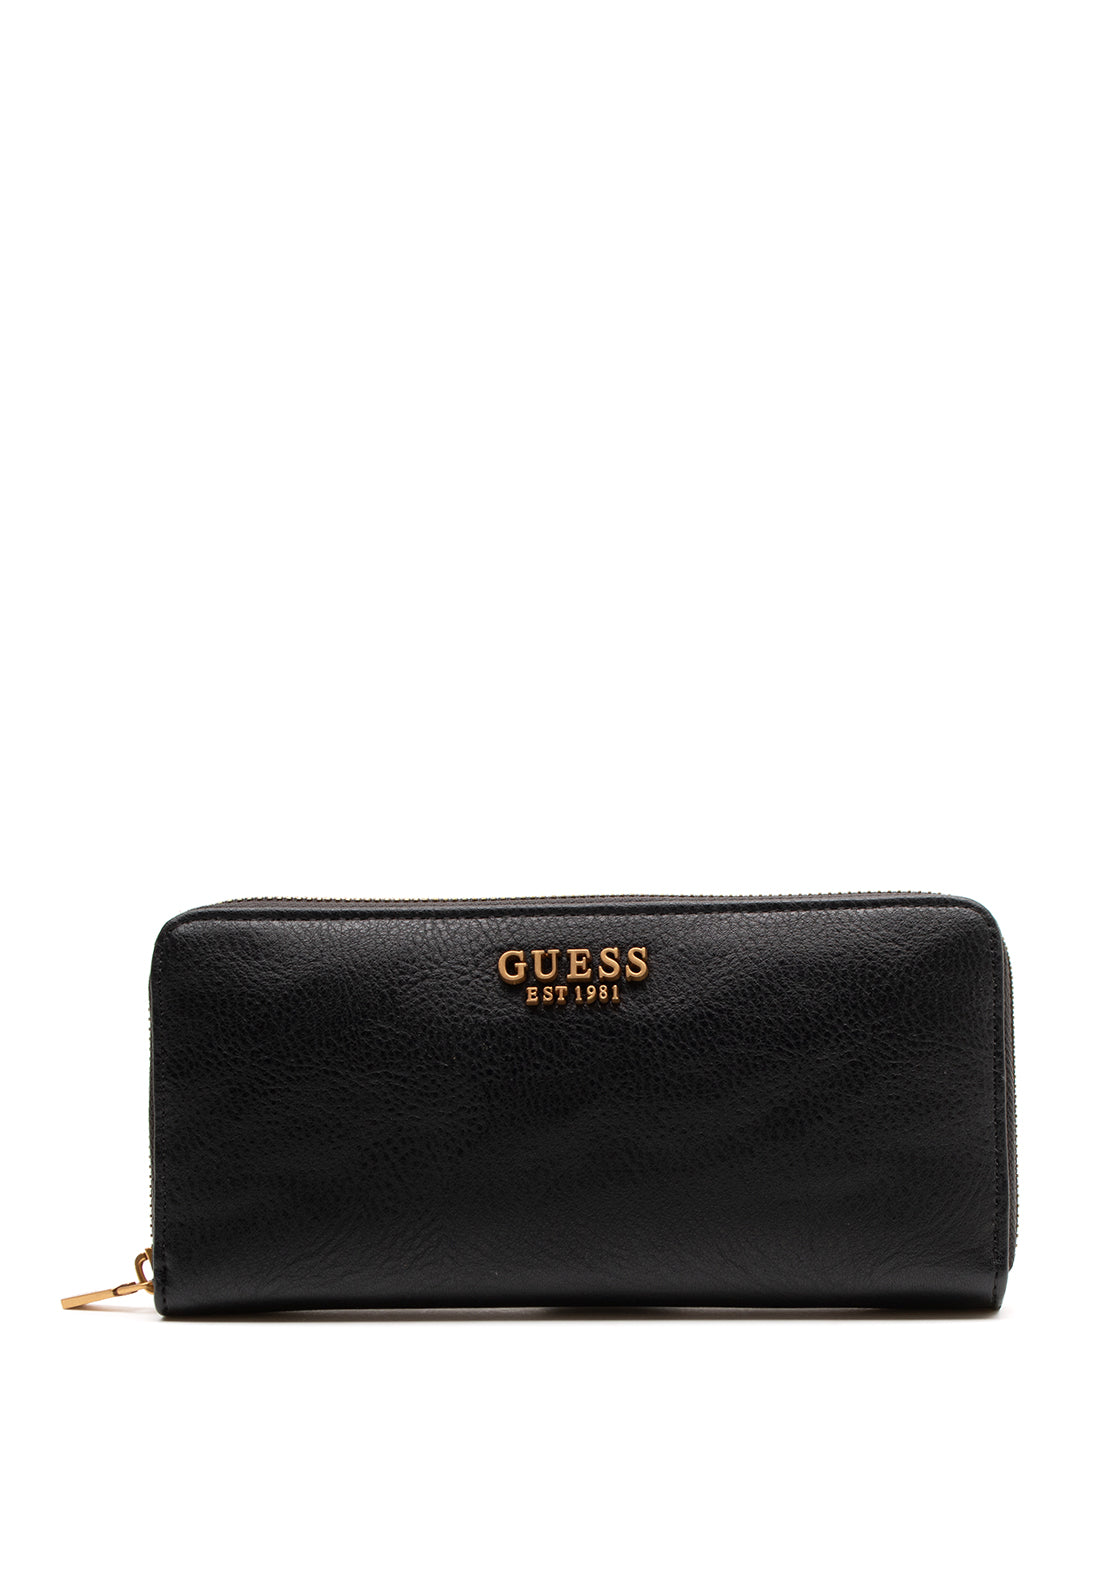 Guess Arja Large Pebbled Faux Leather Purse, Black - McElhinneys